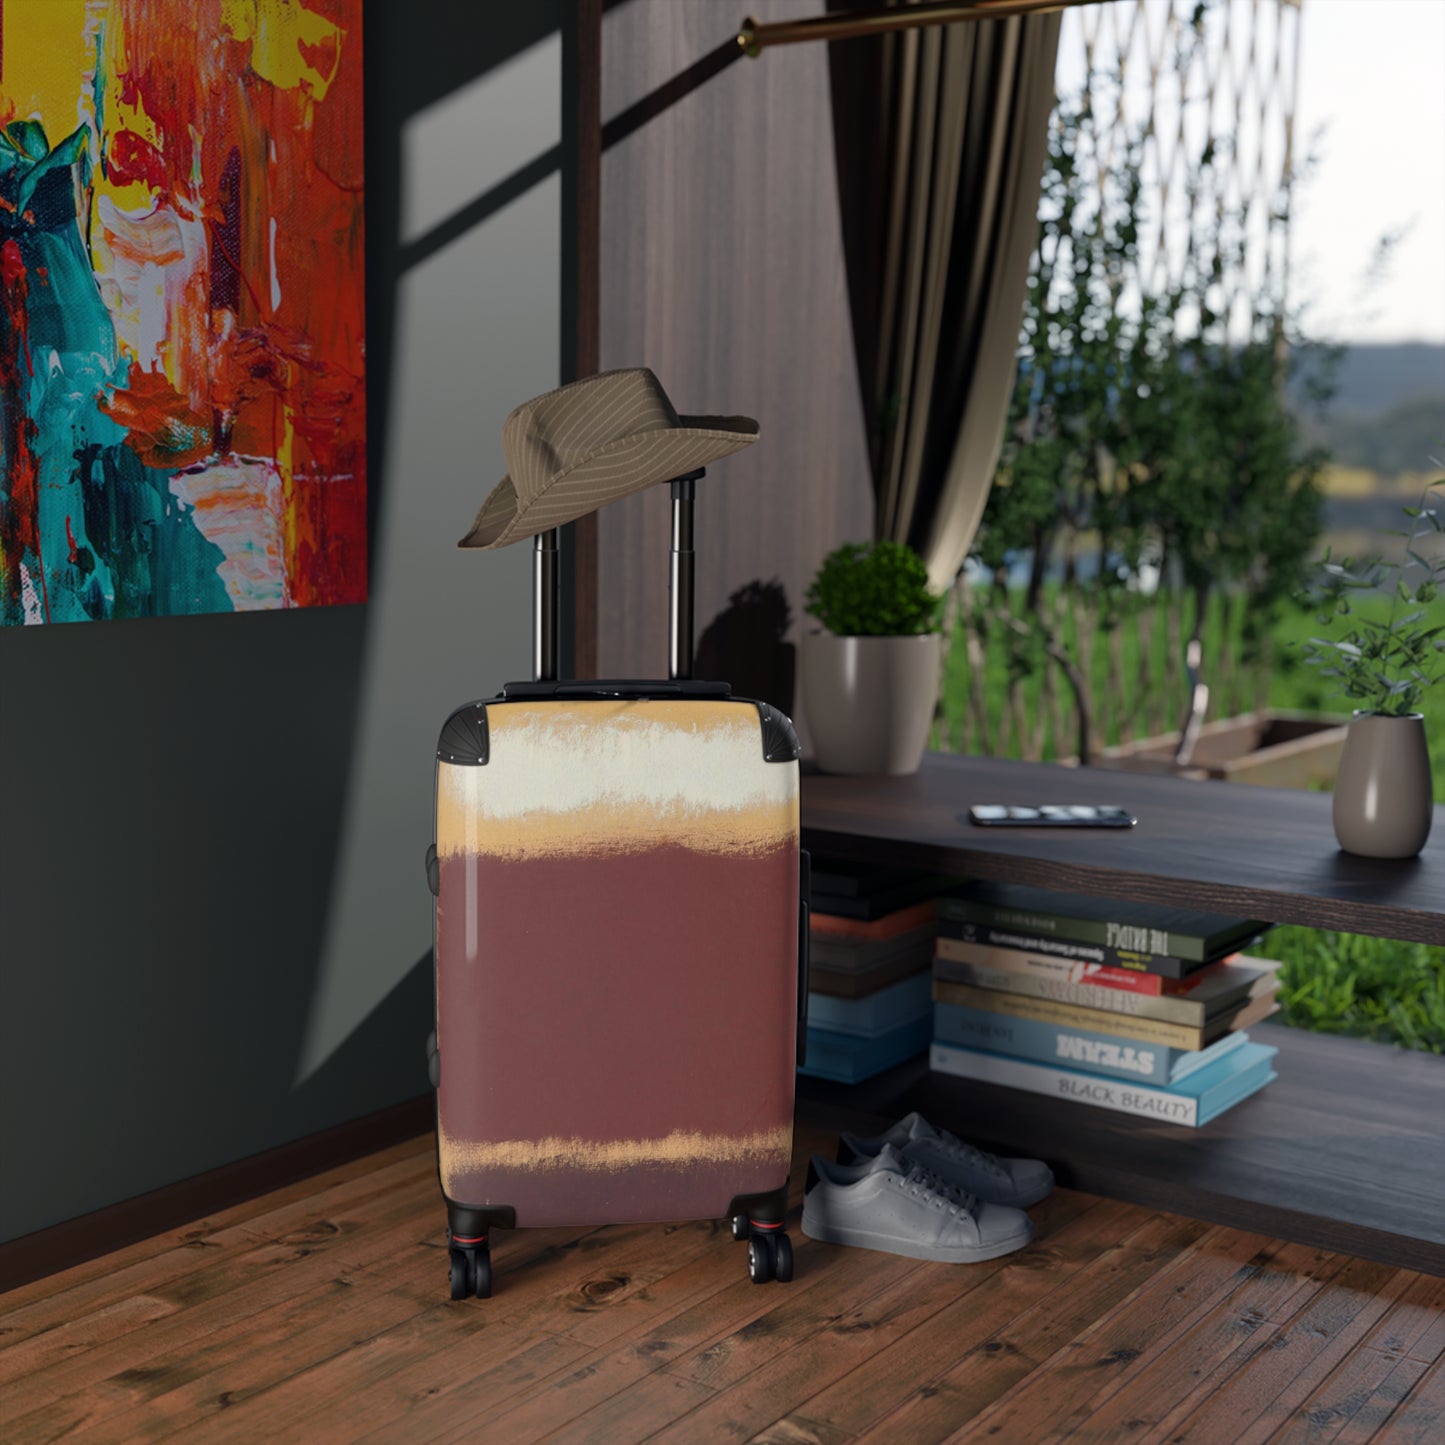 a piece of luggage sitting on top of a wooden floor